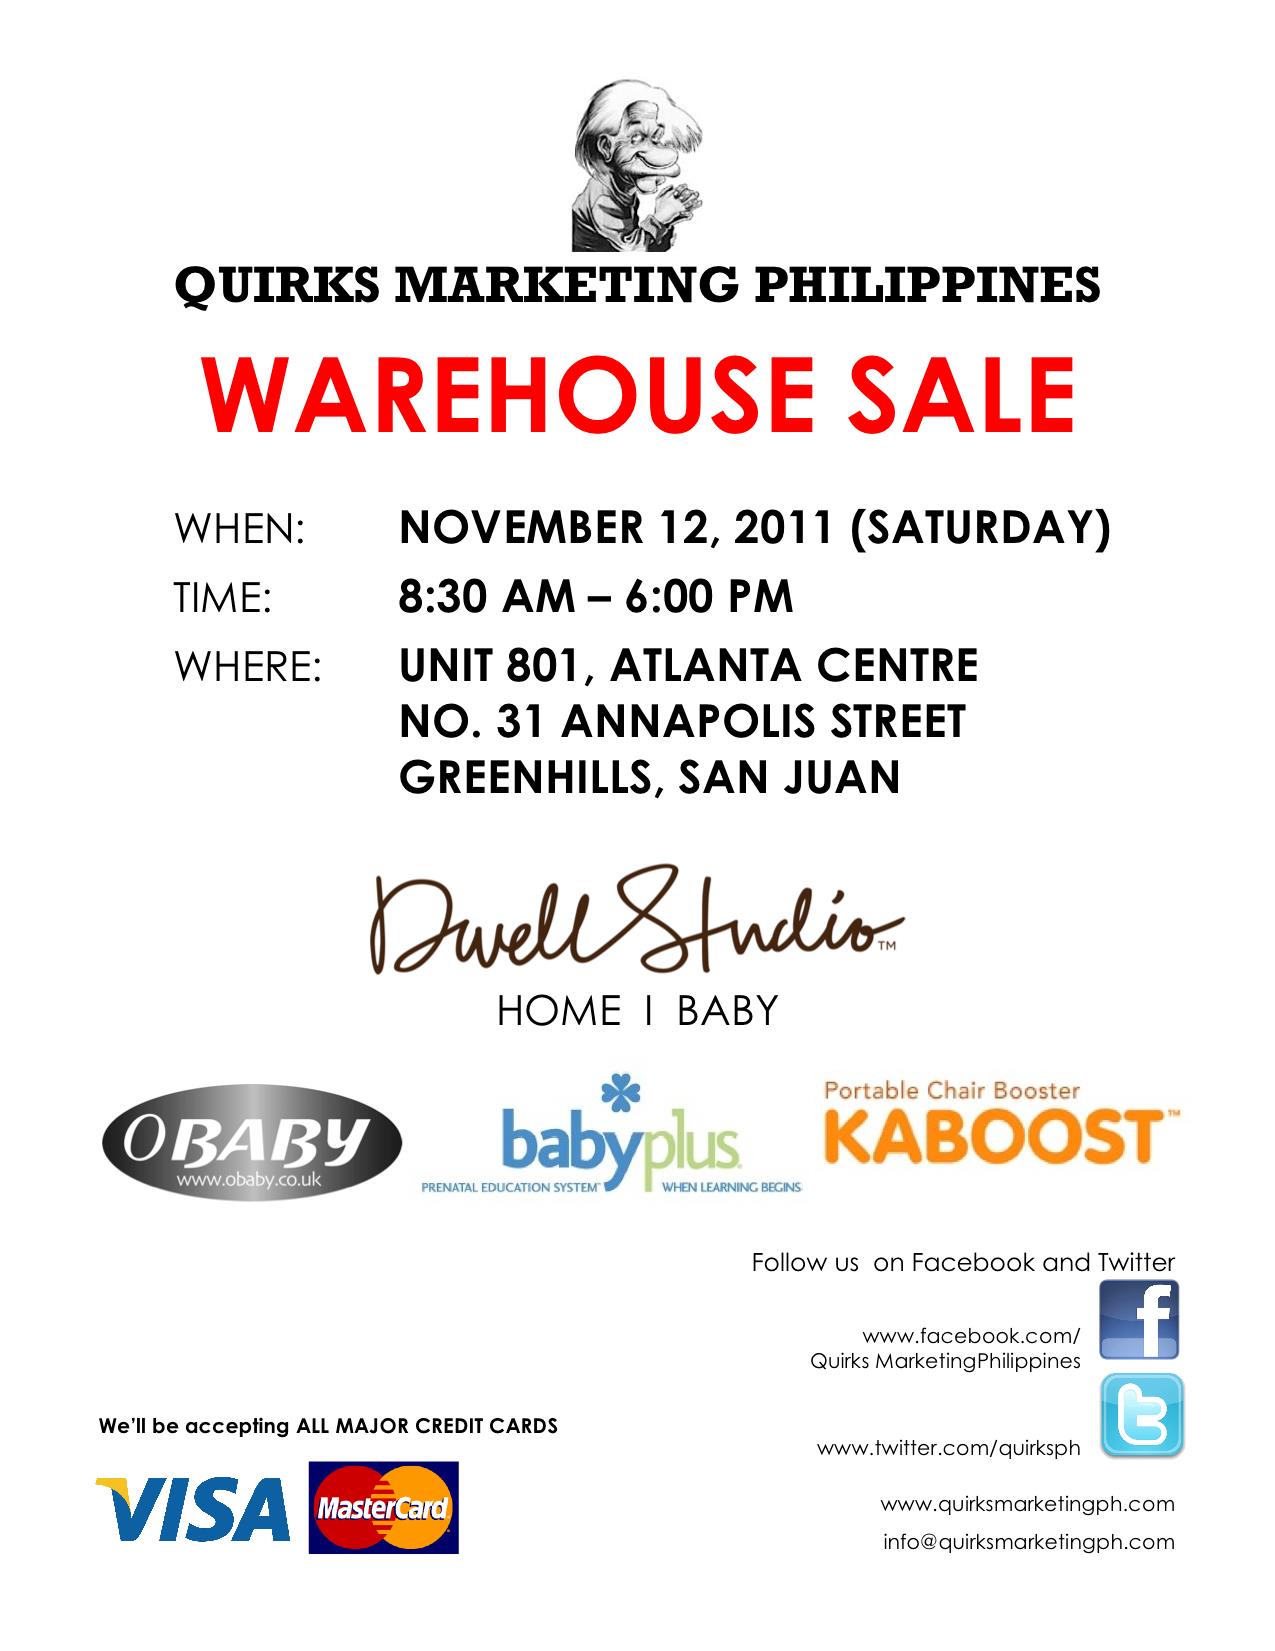 Quirks Warehouse Sale on Nov 12, 2011